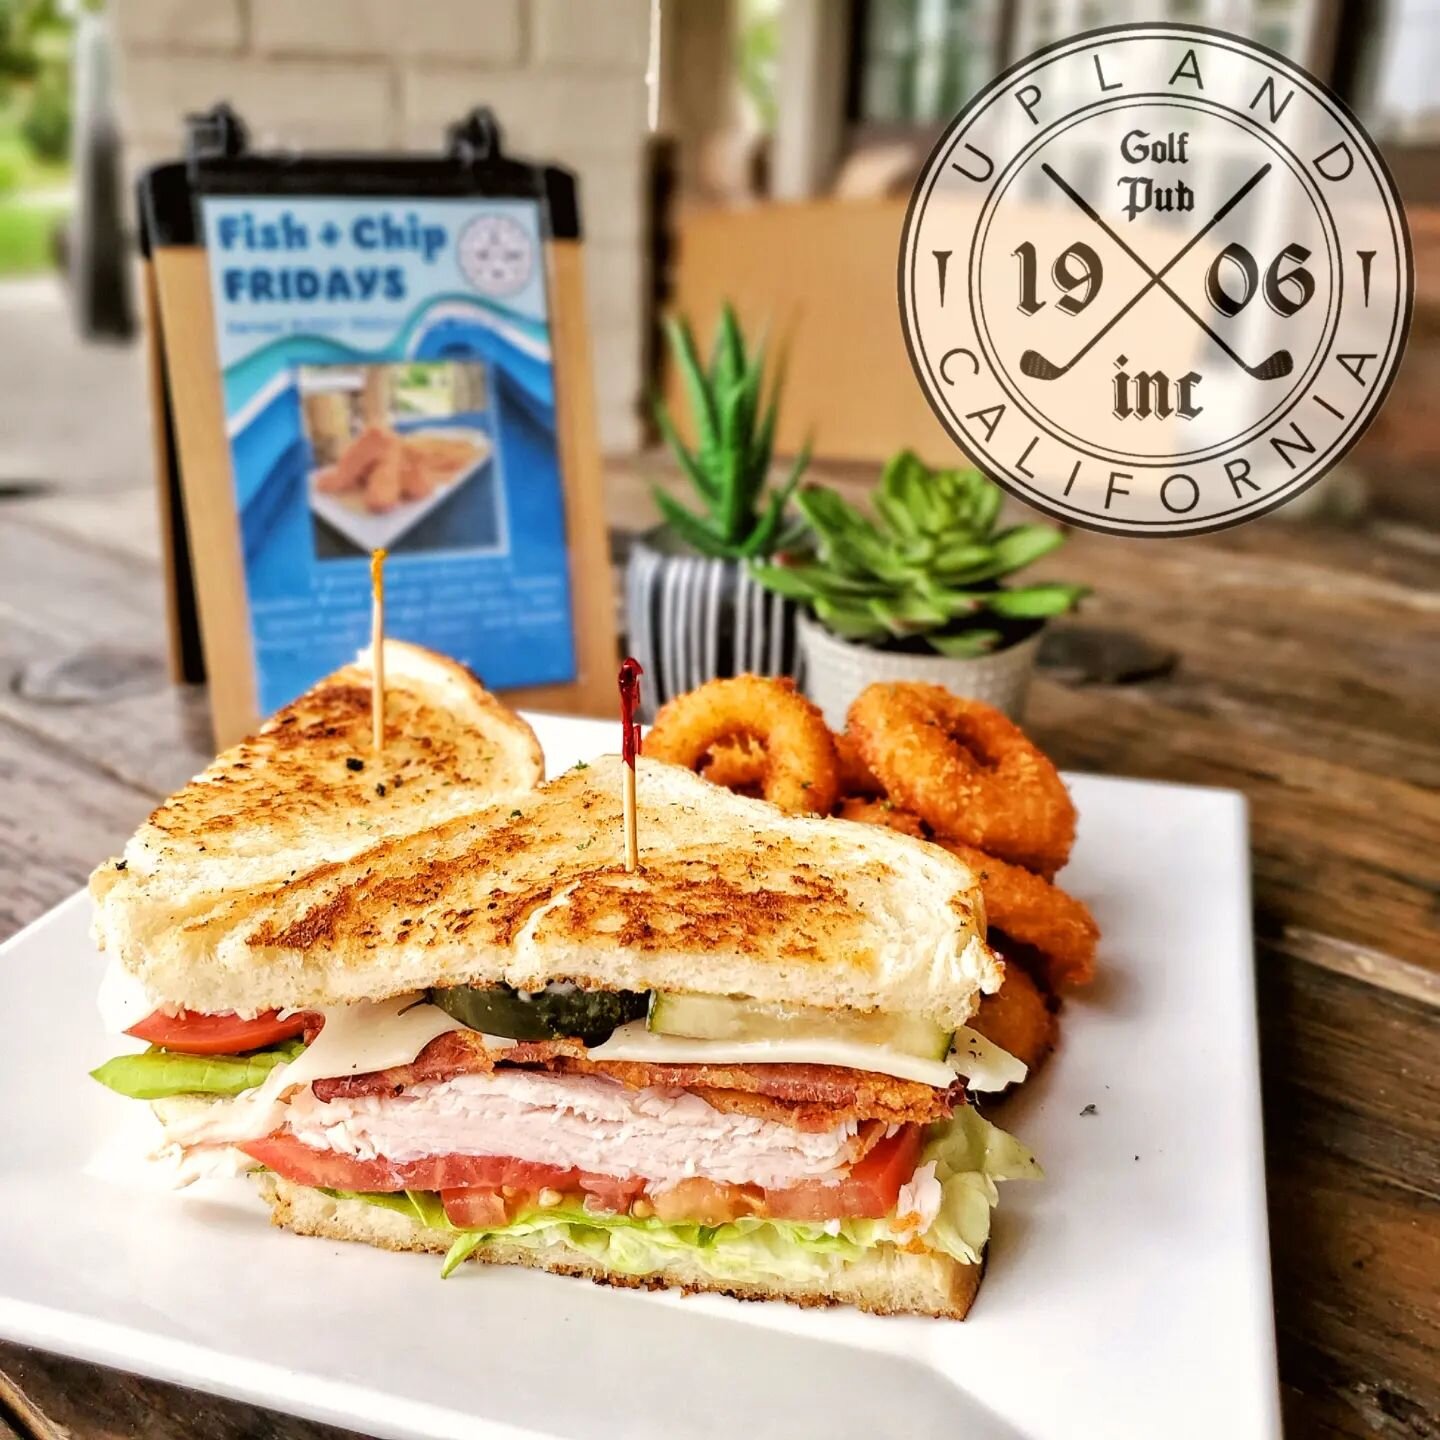 🥪 You're always one sandwich away from a good time... So why not make it a GREAT time with our Turkey Bacon Sandwich!
&bull;
&bull;
&bull;
Your choice of toasted bread (Honey Wheat, Rye, or Sourdough - pictured) with thin deli sliced turkey breast, 